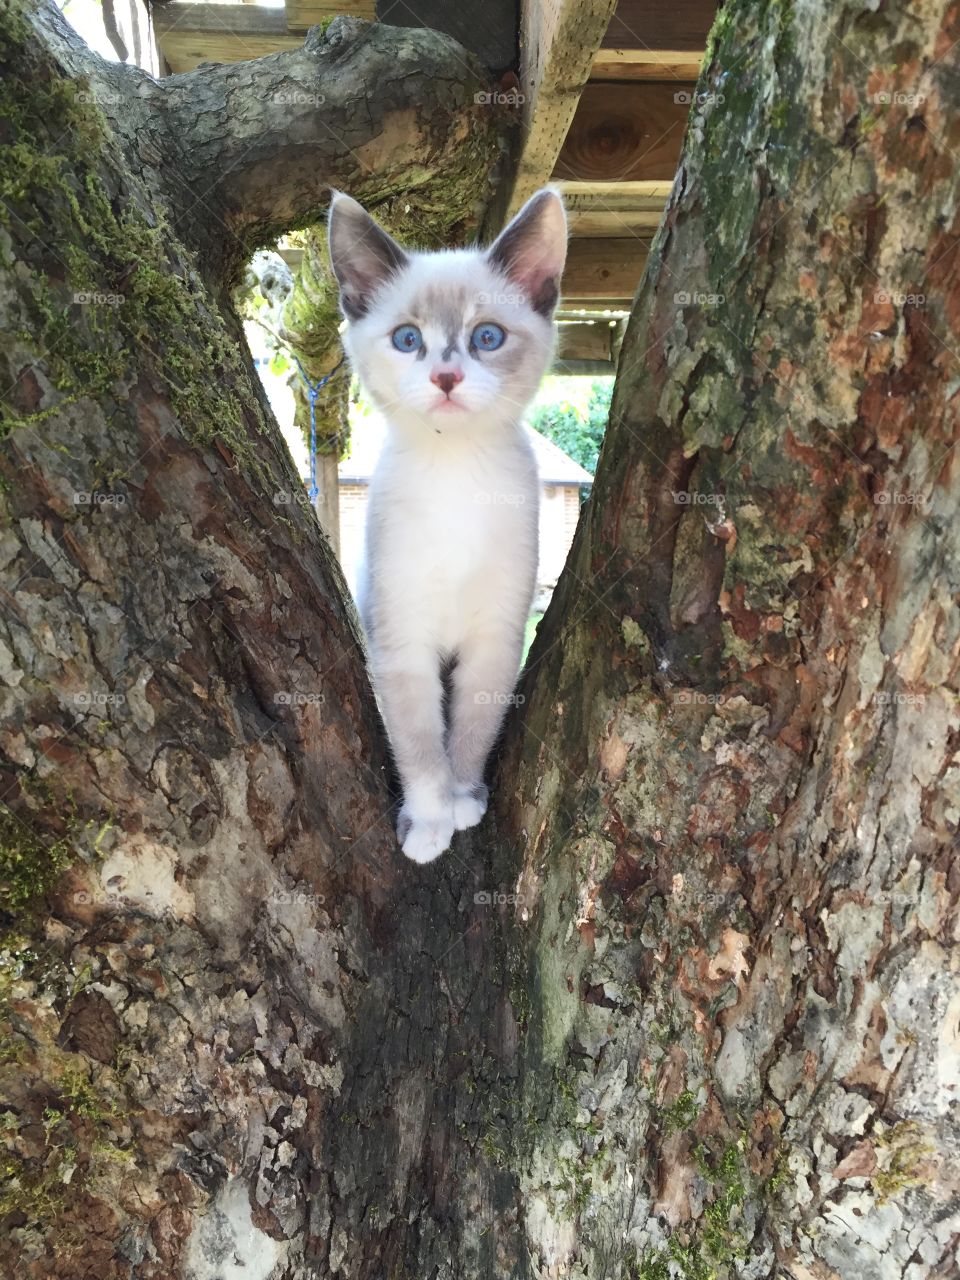 Kitten in the crook of the tree